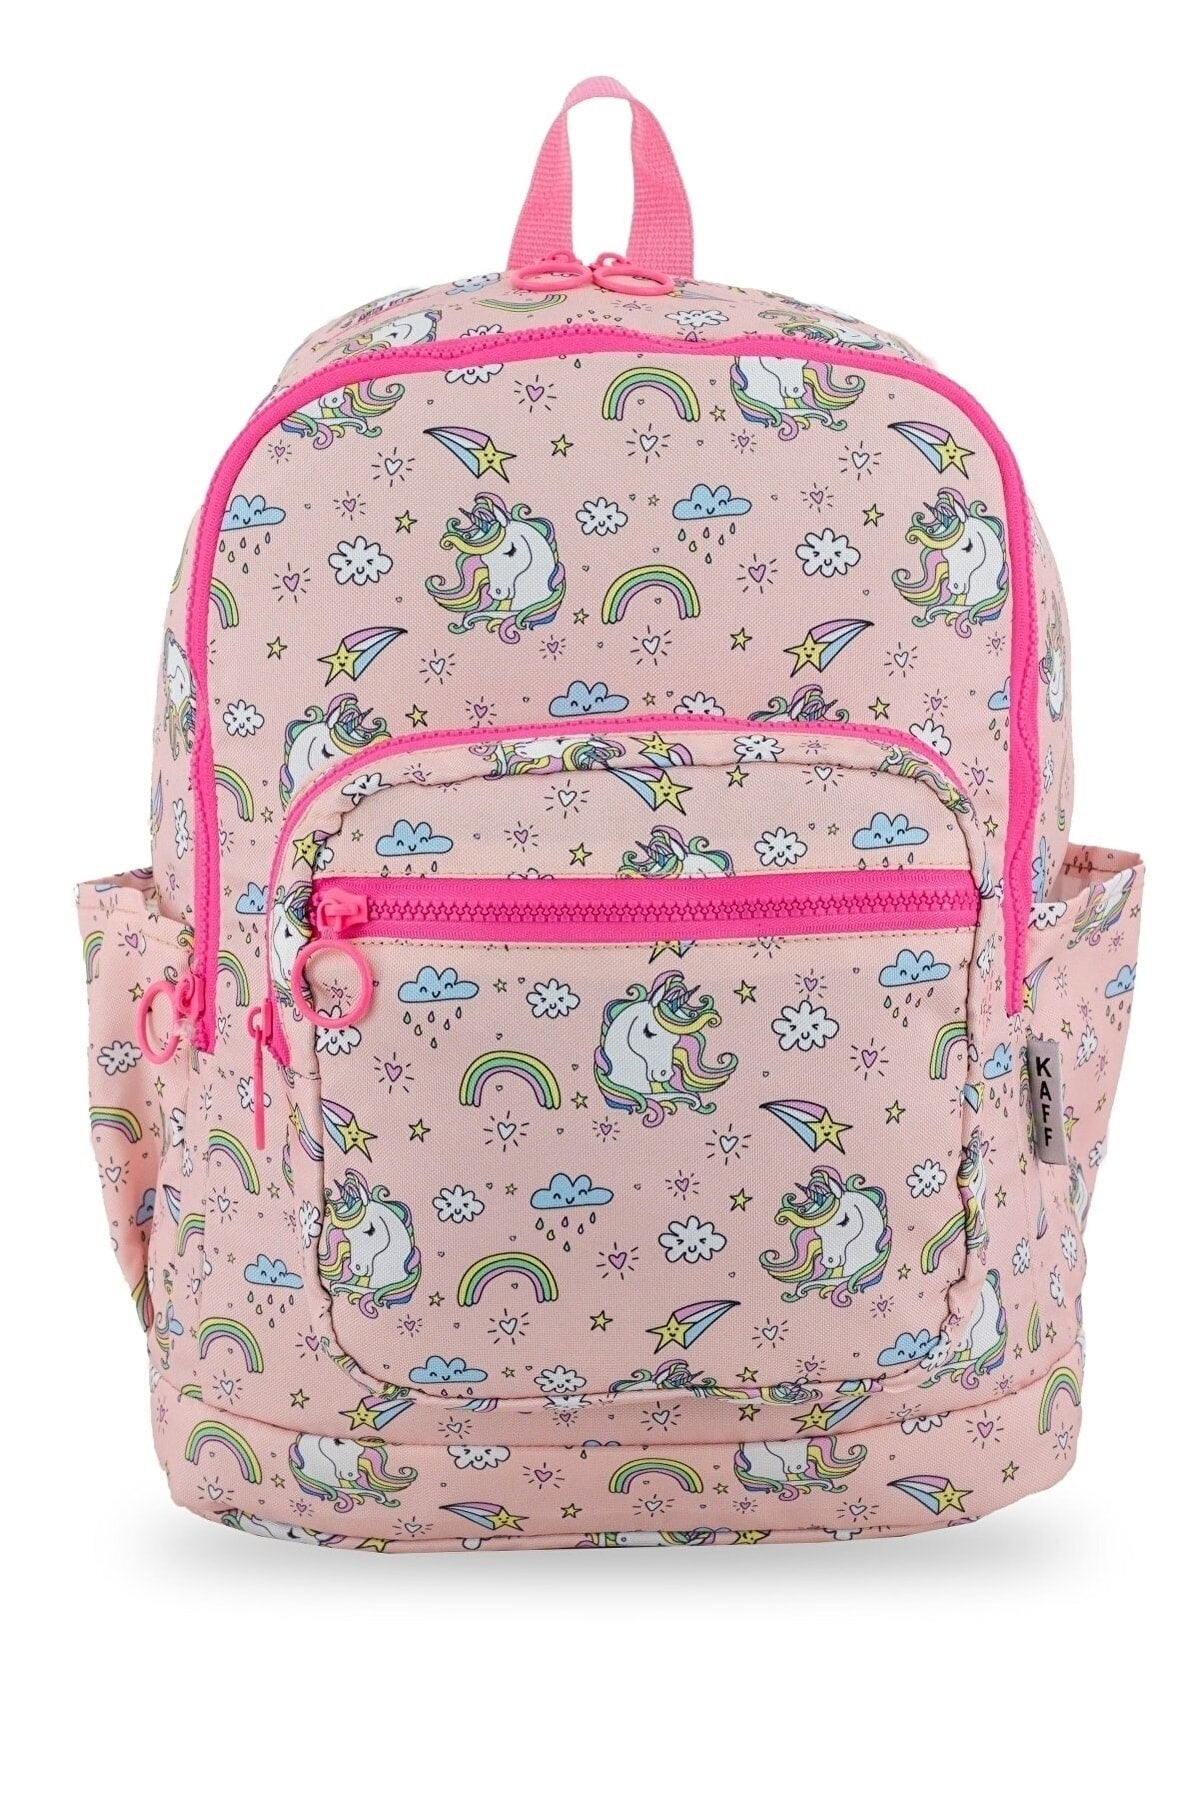 Rainbow Unicorn Pattern Pink 4-Compartment Washable Girls Primary School Backpack